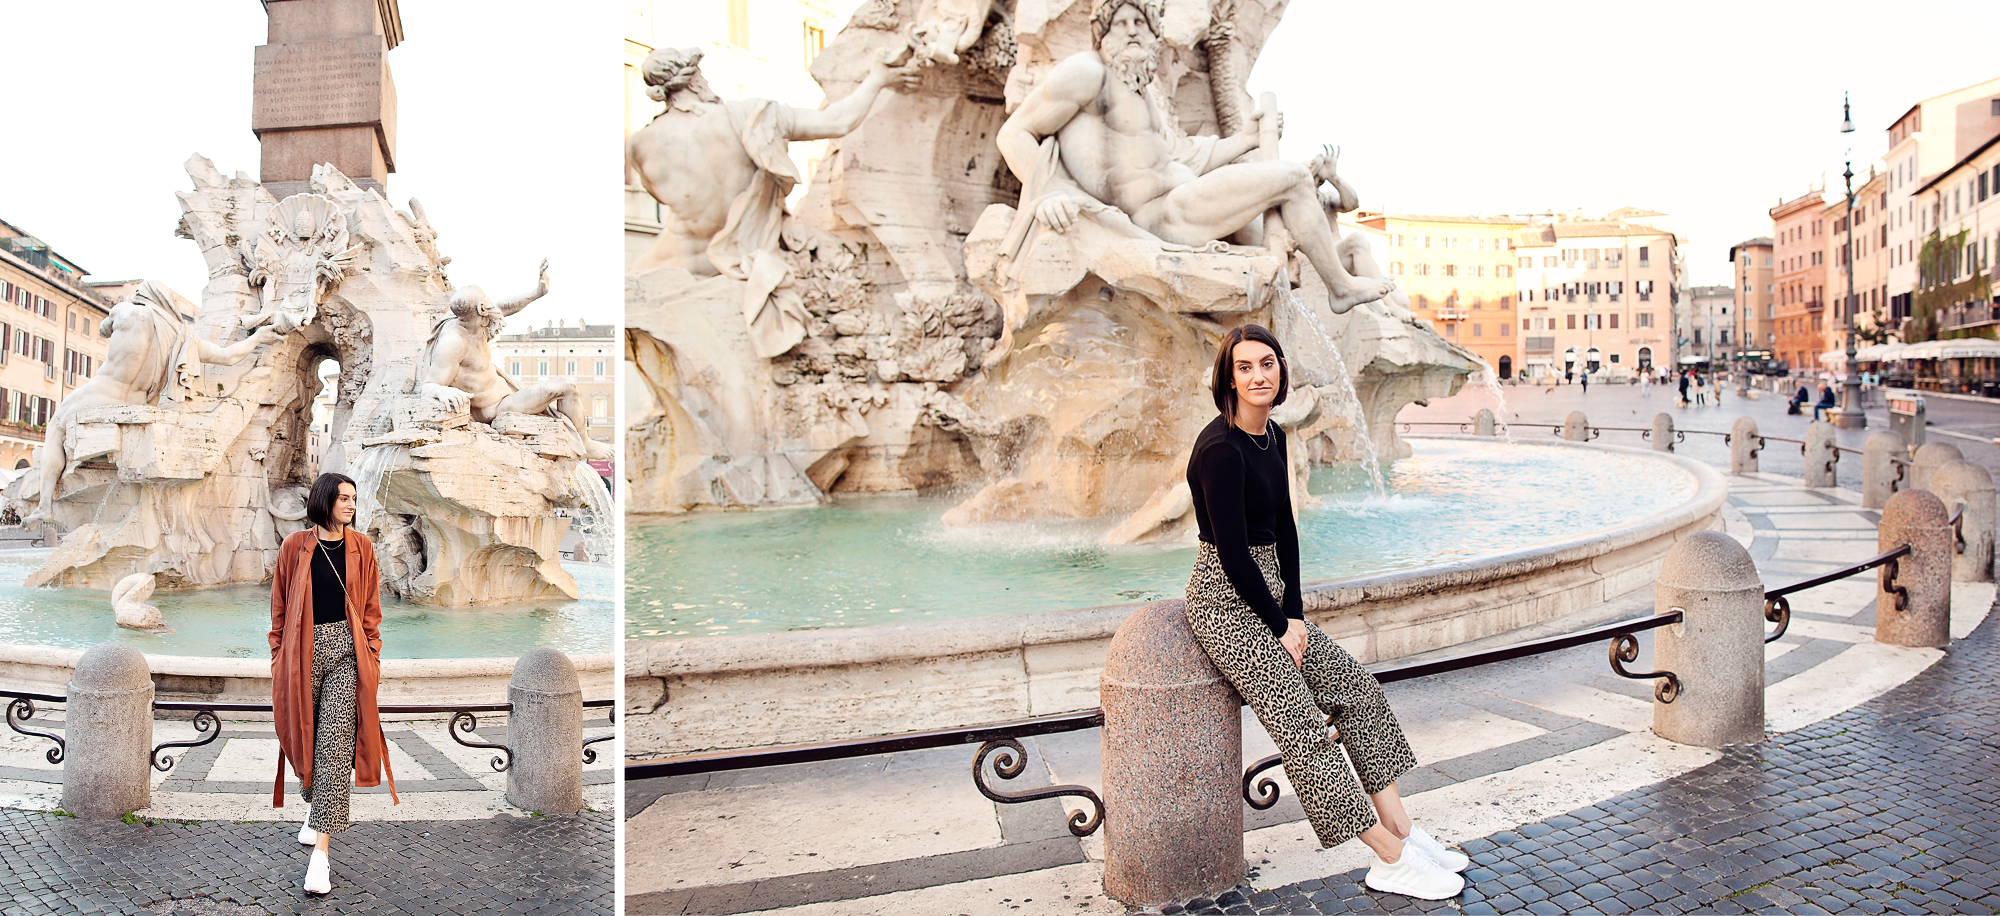 Honeymoon, vacation, family, engagement, maternity, wedding, love story individual and solo photoshoots in Rome, Italy by photographer Tricia Anne Photography | Rome Photographer, vacation, tripadvisor, instagram, fun, married, bride, groom, love, story, photography, session, photoshoot, wedding photographer, mywed, vacation photographer, engagement photo, honeymoon photoshoot, rome honeymoon, rome wedding, elopement in Rome, honeymoon photographer rome, Family Photo shoot Rome, Rome Engagement Photography, Rome Engagement Photographer, Solo Photo shoot, Rome Photography, surprise proposal rome, Solo trip to Rome, What to do in Rome, Solo traveler, Castle Sant’Angelo, Piazza Navona photo shoot